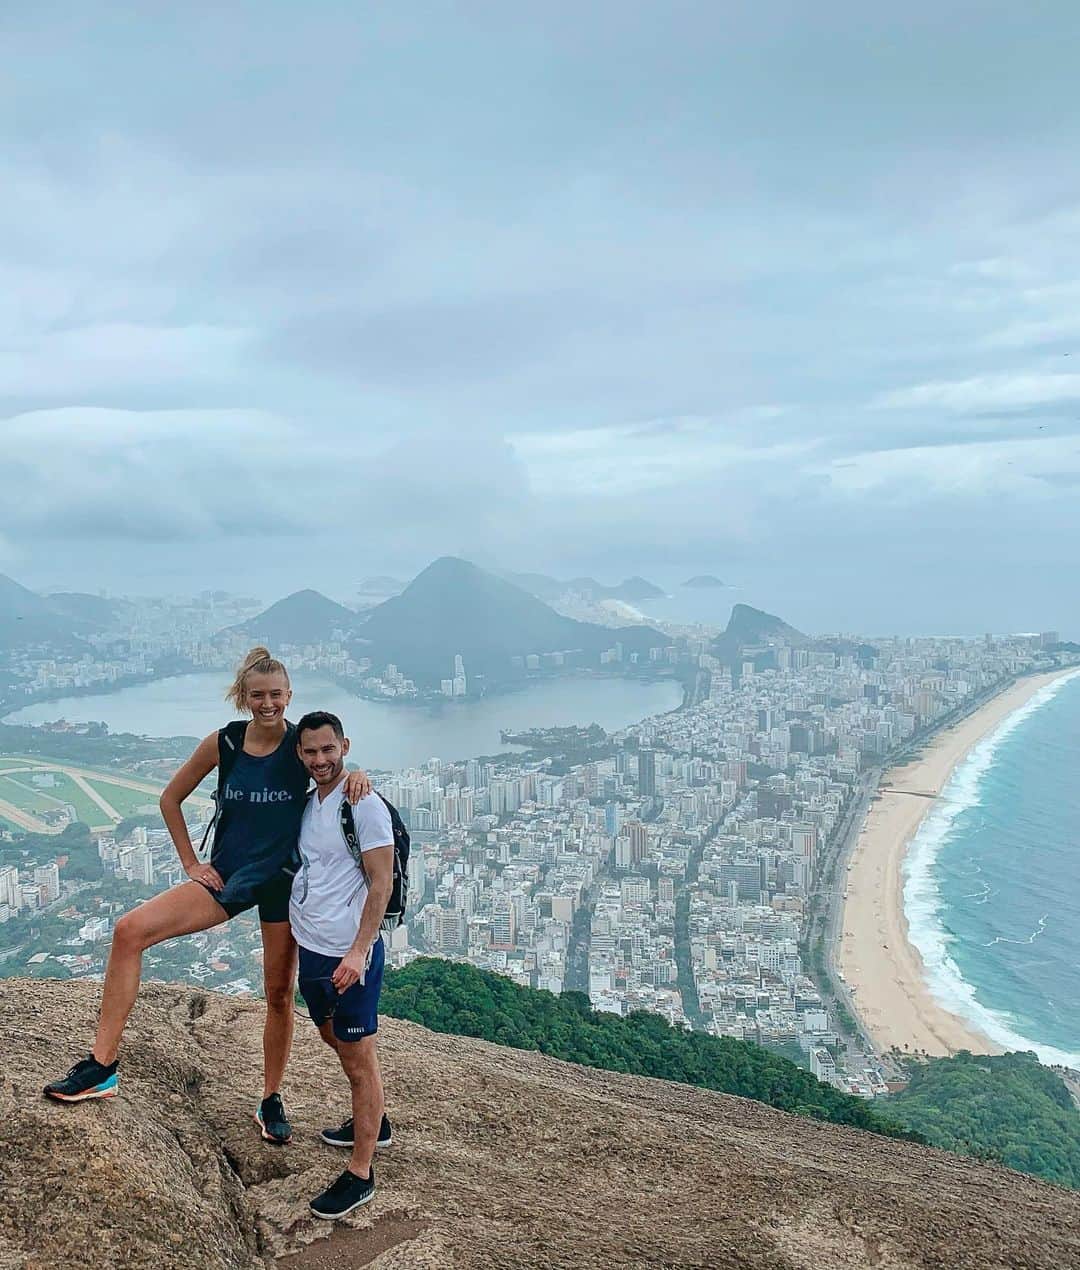 Zanna Van Dijkさんのインスタグラム写真 - (Zanna Van DijkInstagram)「My favourite hiking buddy 🥰❤️ Rio is such an incredibly diverse city - you have sky scrapers, mountains and the ocean all on your doorstep 🌃  Here’s @antonymaule and I’s favourite Rio tips, tricks & experiences. Click like & save so you can use this later ✅ ➡️ @riobybike cycling tours - the perfect way to get to grips with the city 🚲 ➡️ Eat the most EPIC vegan food at @tevavegetal (don’t miss the apple pie!) 🌱 ➡️ Do a hiking trip with @rafaelcaja_expedition. We loved the Dois Irmãos trail but other popular hikes are Pedro Bonita, Pedra De Gávea, Pedra do Telegrapho & Pico de Tijuca 🥾 ➡️ Fill up on fresh açai on every street corner 😋 ➡️ Do as the locals do - run along Copocabana or Ipanema beach at sunset 🌇 ➡️ Go paragliding with @Querovoar021, get an adrenaline rush & see Rio from the sky 🦅 ➡️ See the largest mural by a single person at Etnias 🎨 ➡️ Train with the locals at @cfp9 🏋🏼‍♀️ ➡️ Get off the beaten path - explore Grumari & it’s quiet but stunning beaches & trails ⛰ ➡️ Tick off the tourist spots: Christ The Redeemer, Sugarloaf Mountain, Escadaria Selaron & the Botanical Gardens 🌺 ➡️ Stay safe. Keep your wits about you and use common sense. No flashy jewellery, clothing or tech 👮‍♀️ What’s your Rio tip?! Let’s make this post an awesome resource for those travelling to this beautiful city 🇧🇷 #riodejaneiro #riotravel #travelblogger #exploremore #hikinggirl #getoutdoors #hikingcouple #travelcouple #wanderlust #greatoutdoors #hikingtrip #riohiking」11月14日 19時04分 - zannavandijk